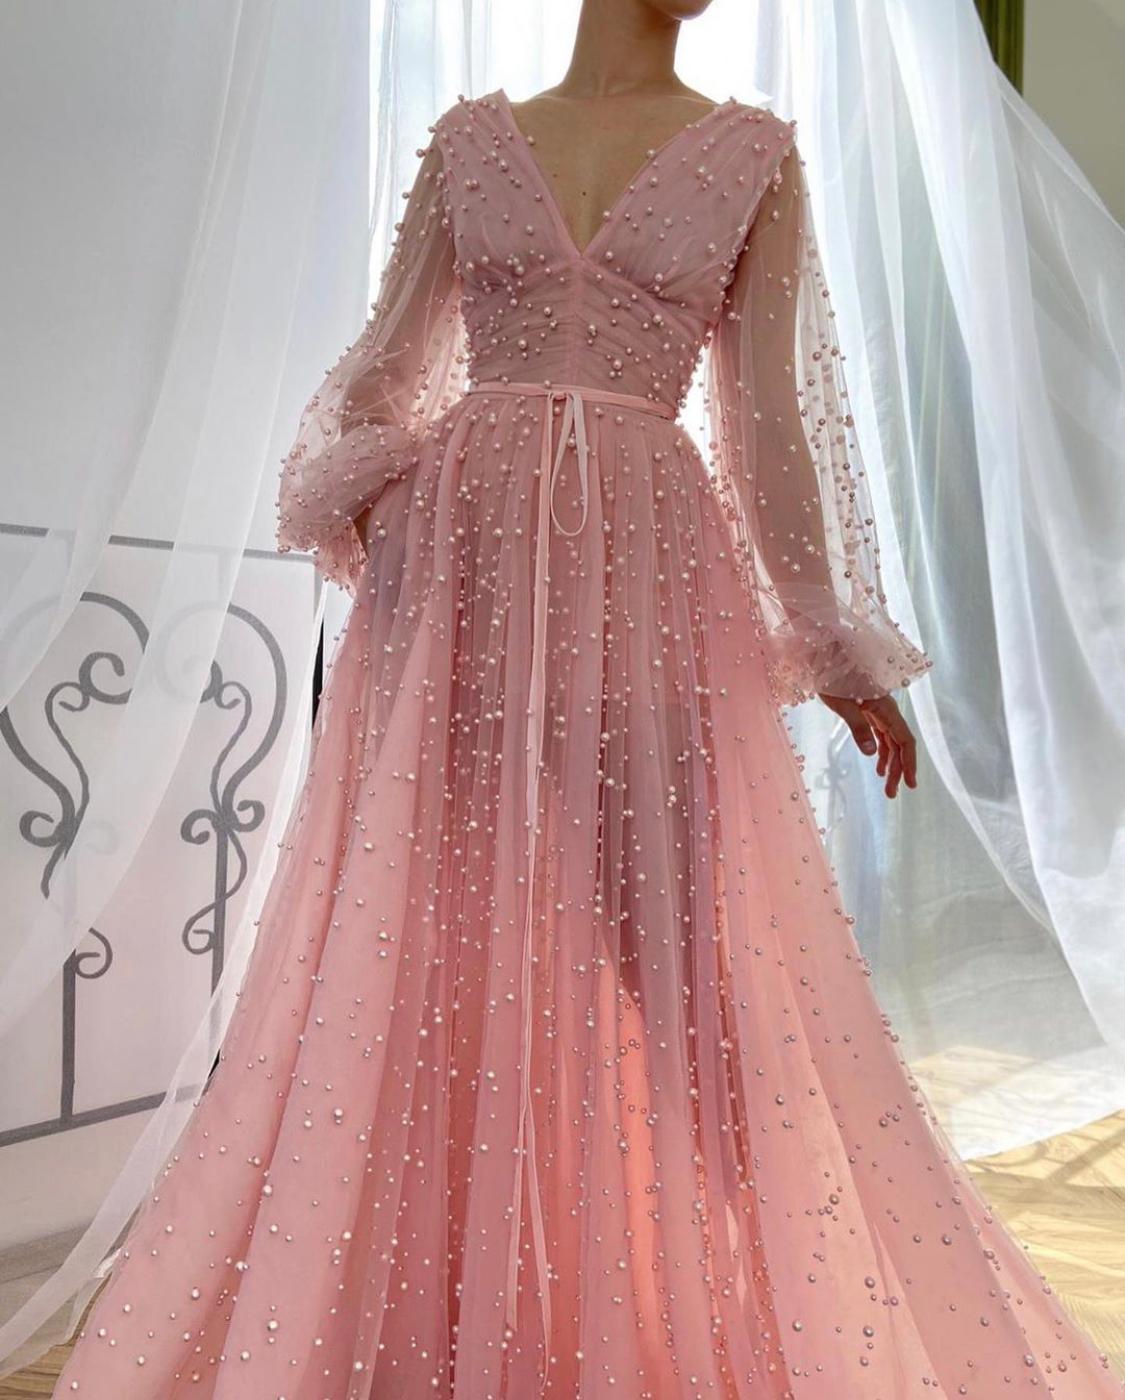 Pink A-Line dress with long sleeves, v-neck and beading